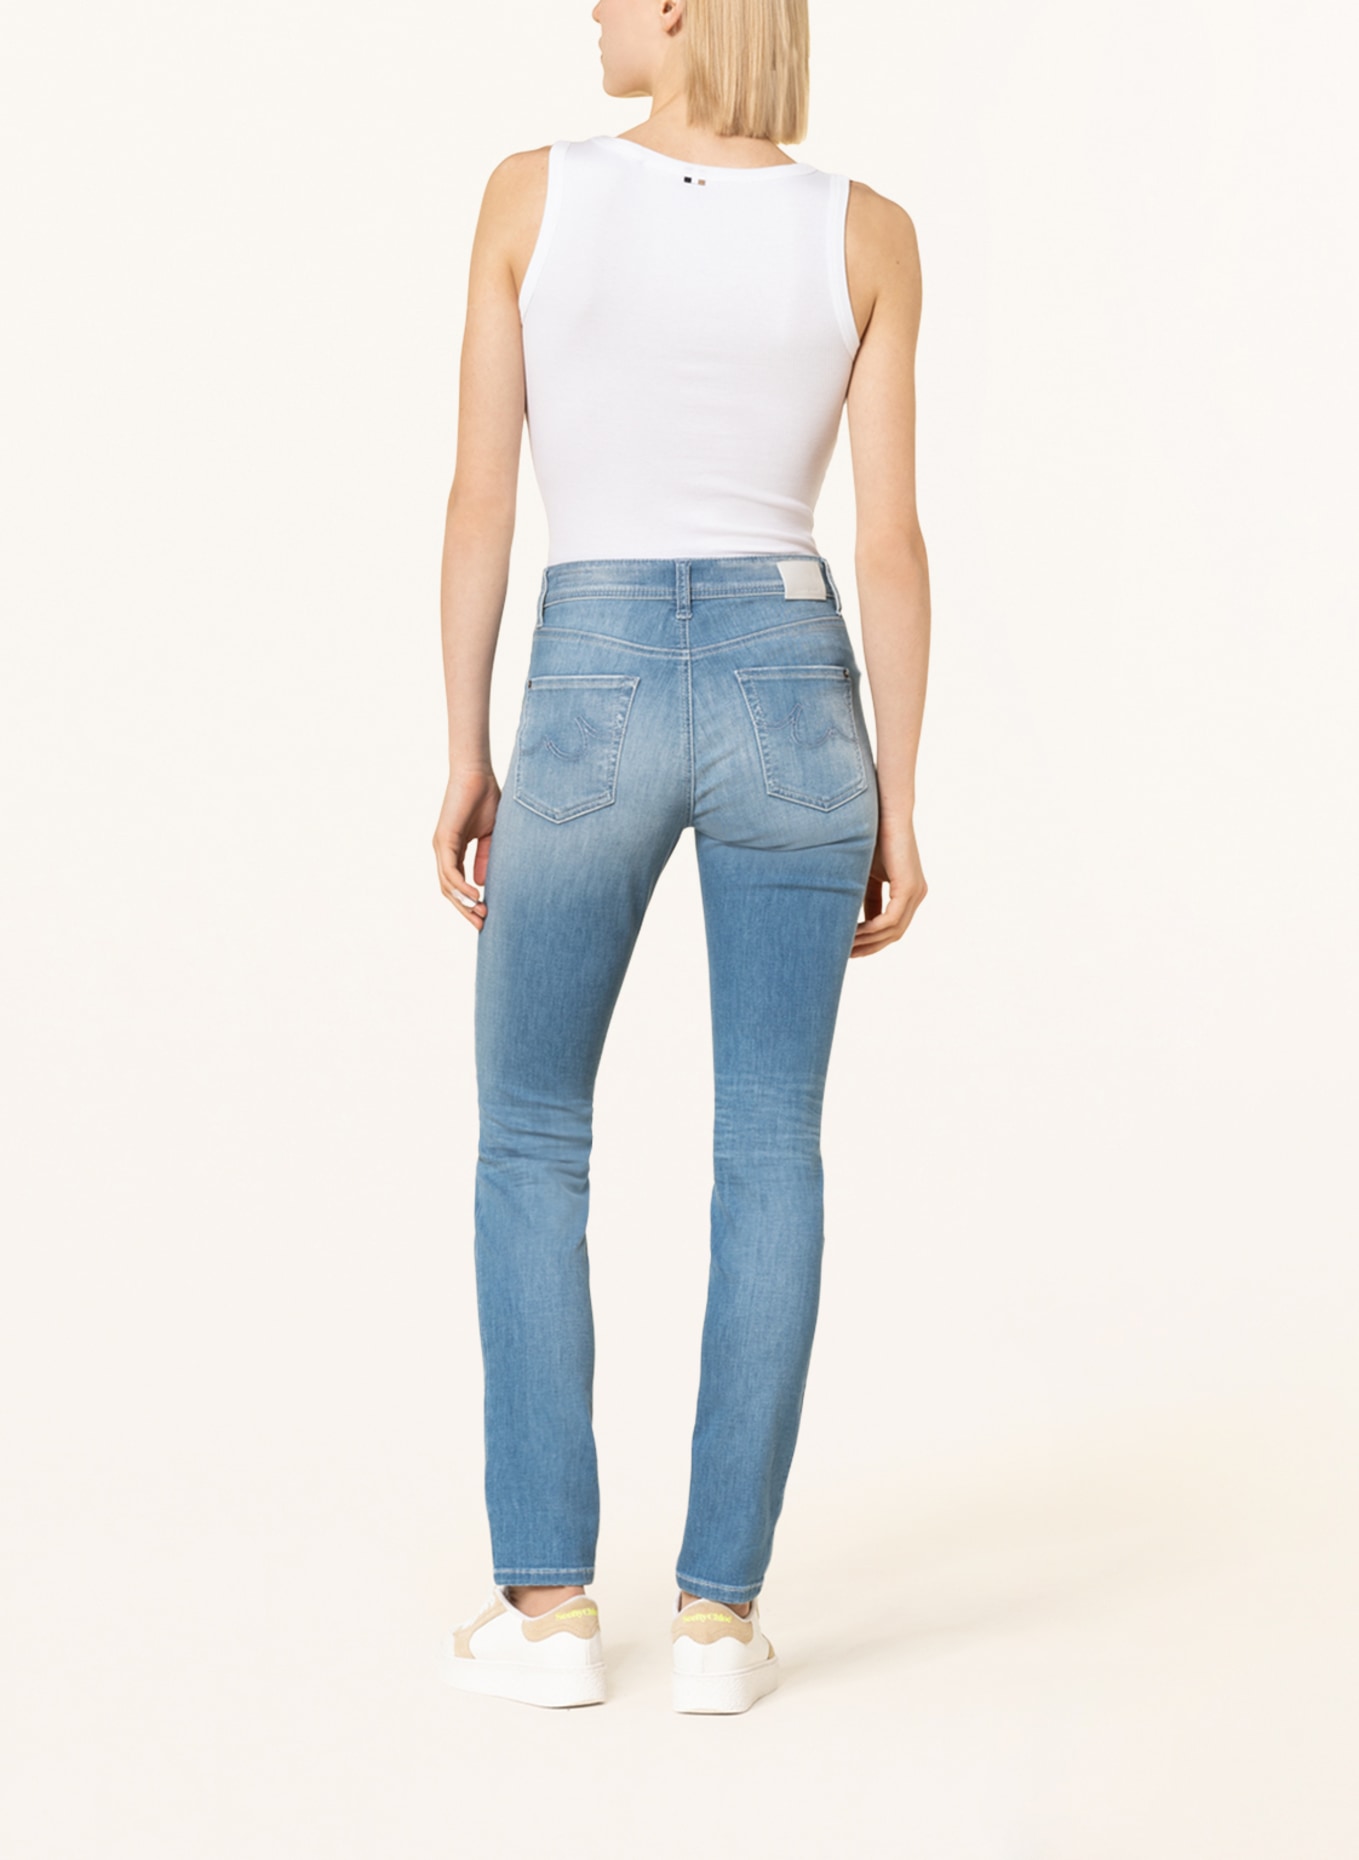 CAMBIO Jeans PARLA, Color: 5222 medium 3D used (Image 3)